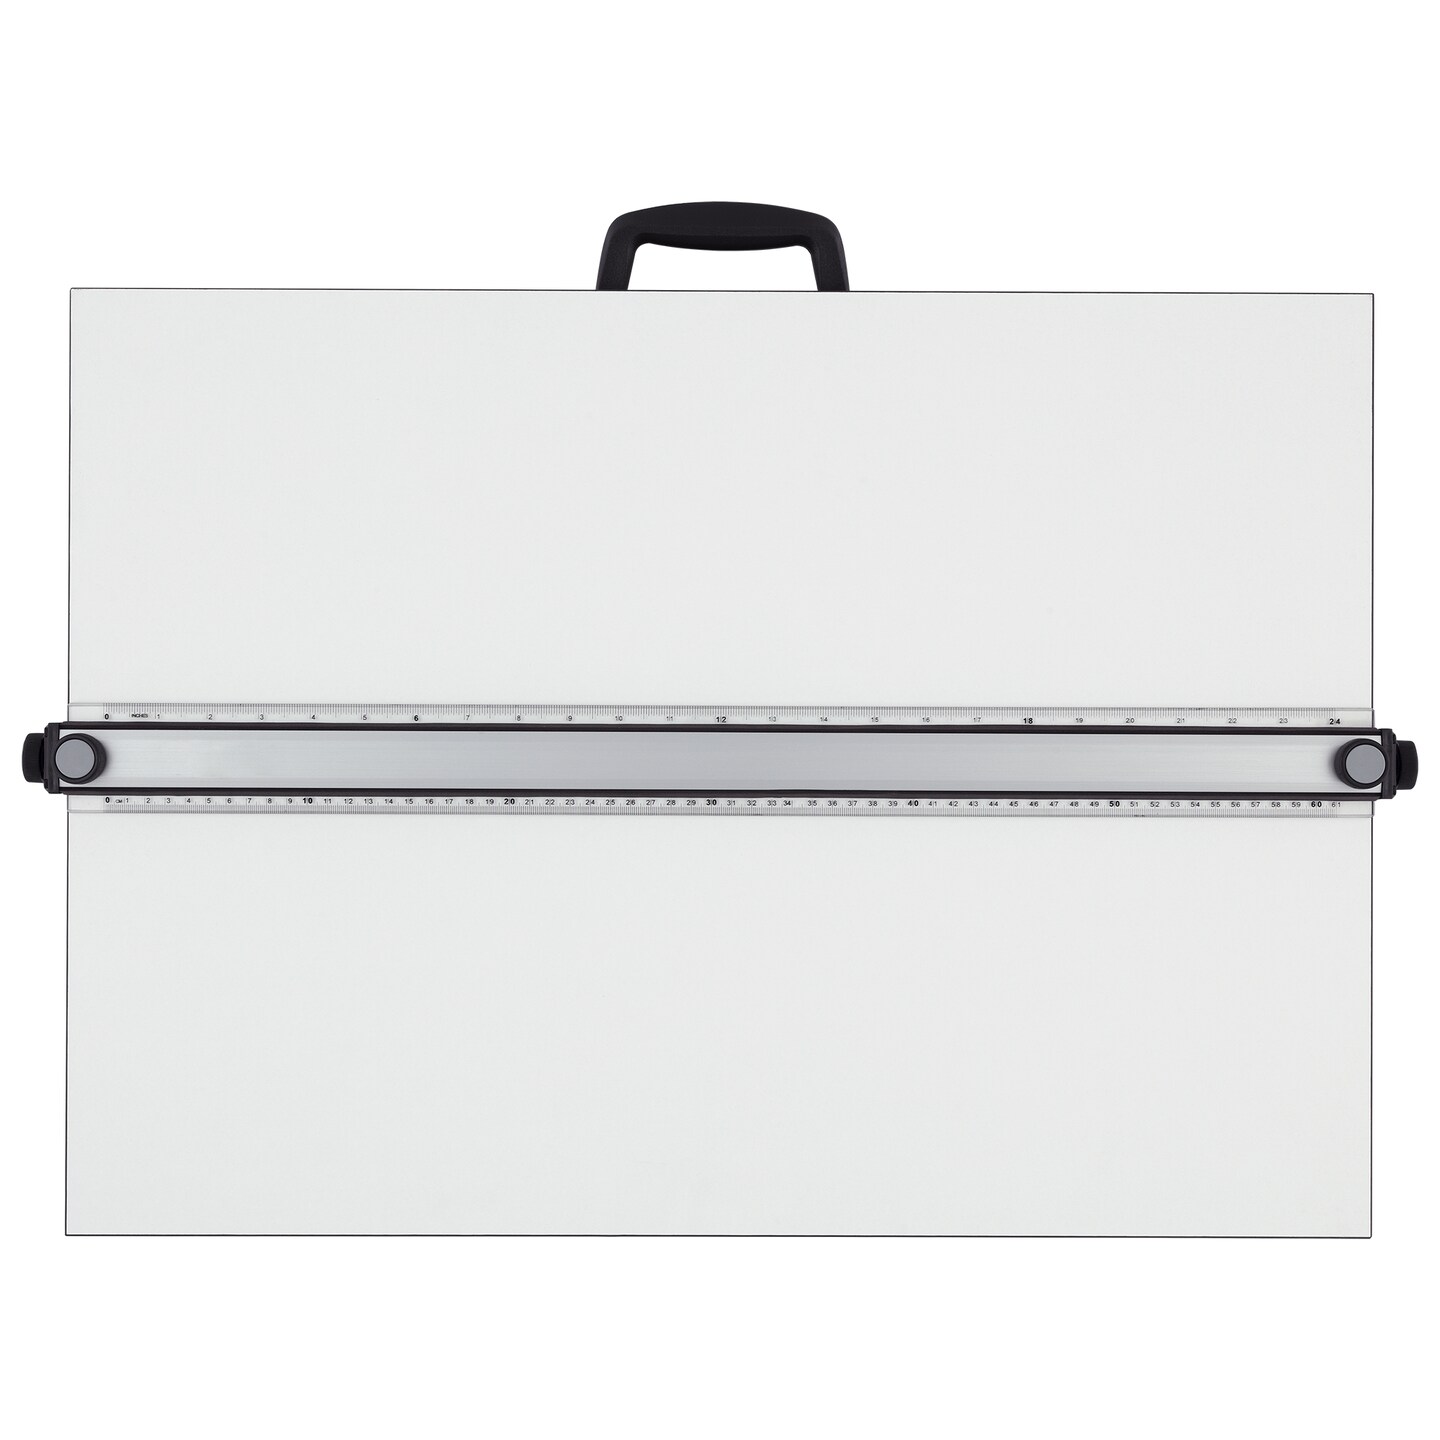 Acurit PXB Drawing Boards for Artists and Designers - Portable Workspace  for Drawing, Sketching, Drafting, Painting - Fixed Angled Laminated Surface  with Ruler and Parallel Motion Bar